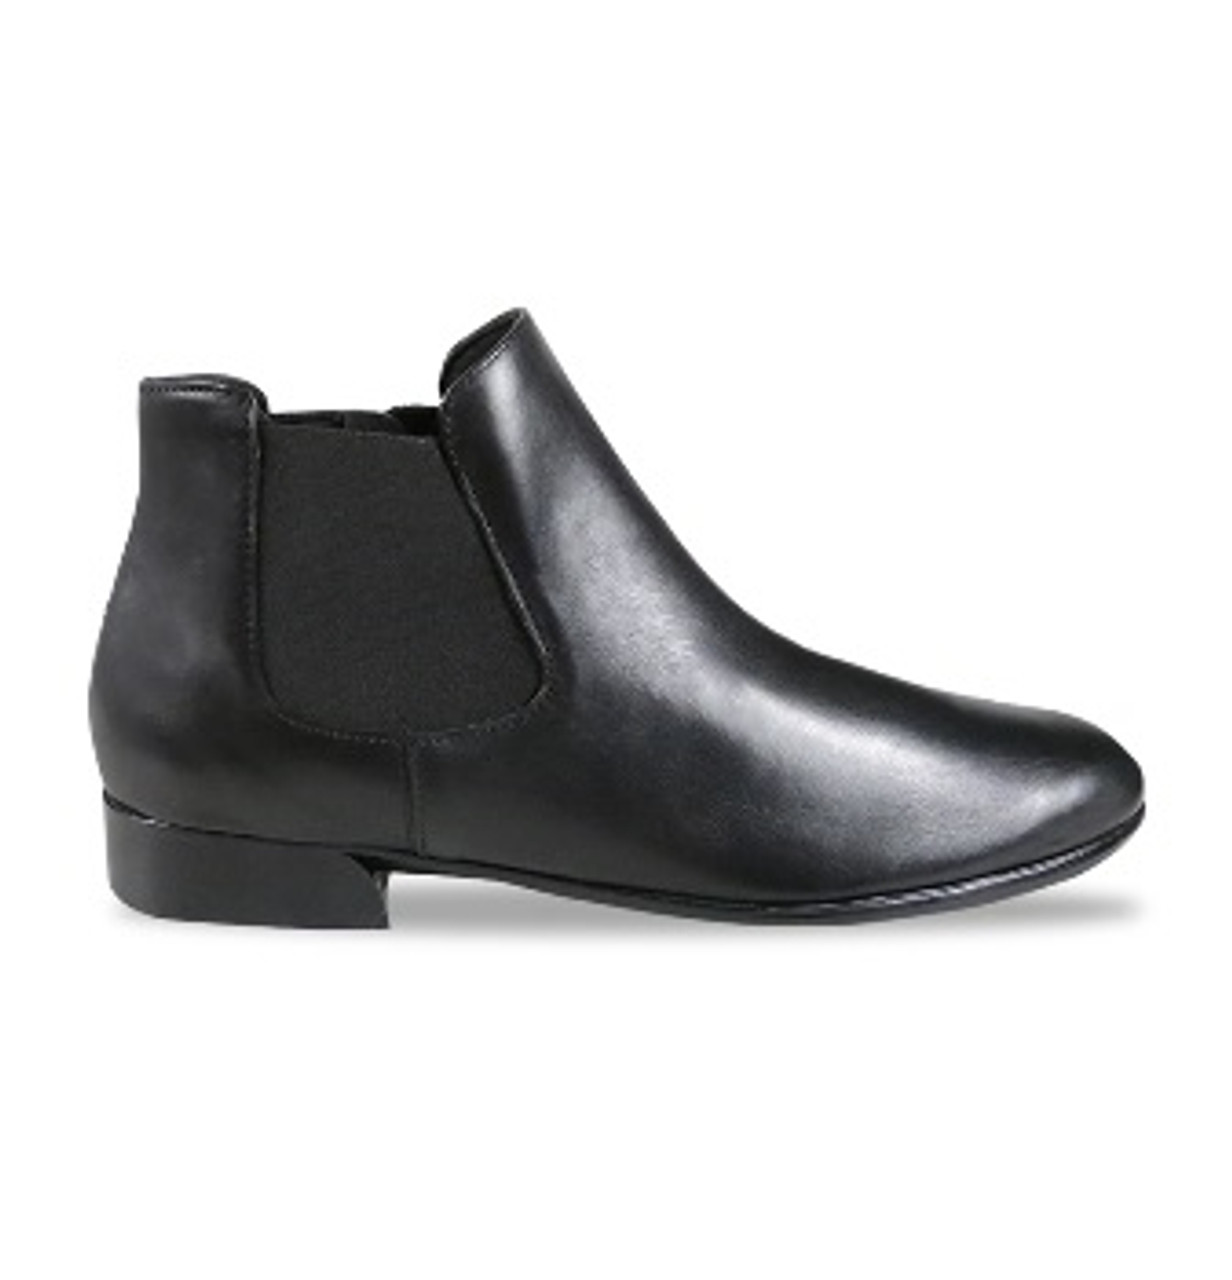 Munro Women's Cate Boot in Black Leather - Daniels Shoes